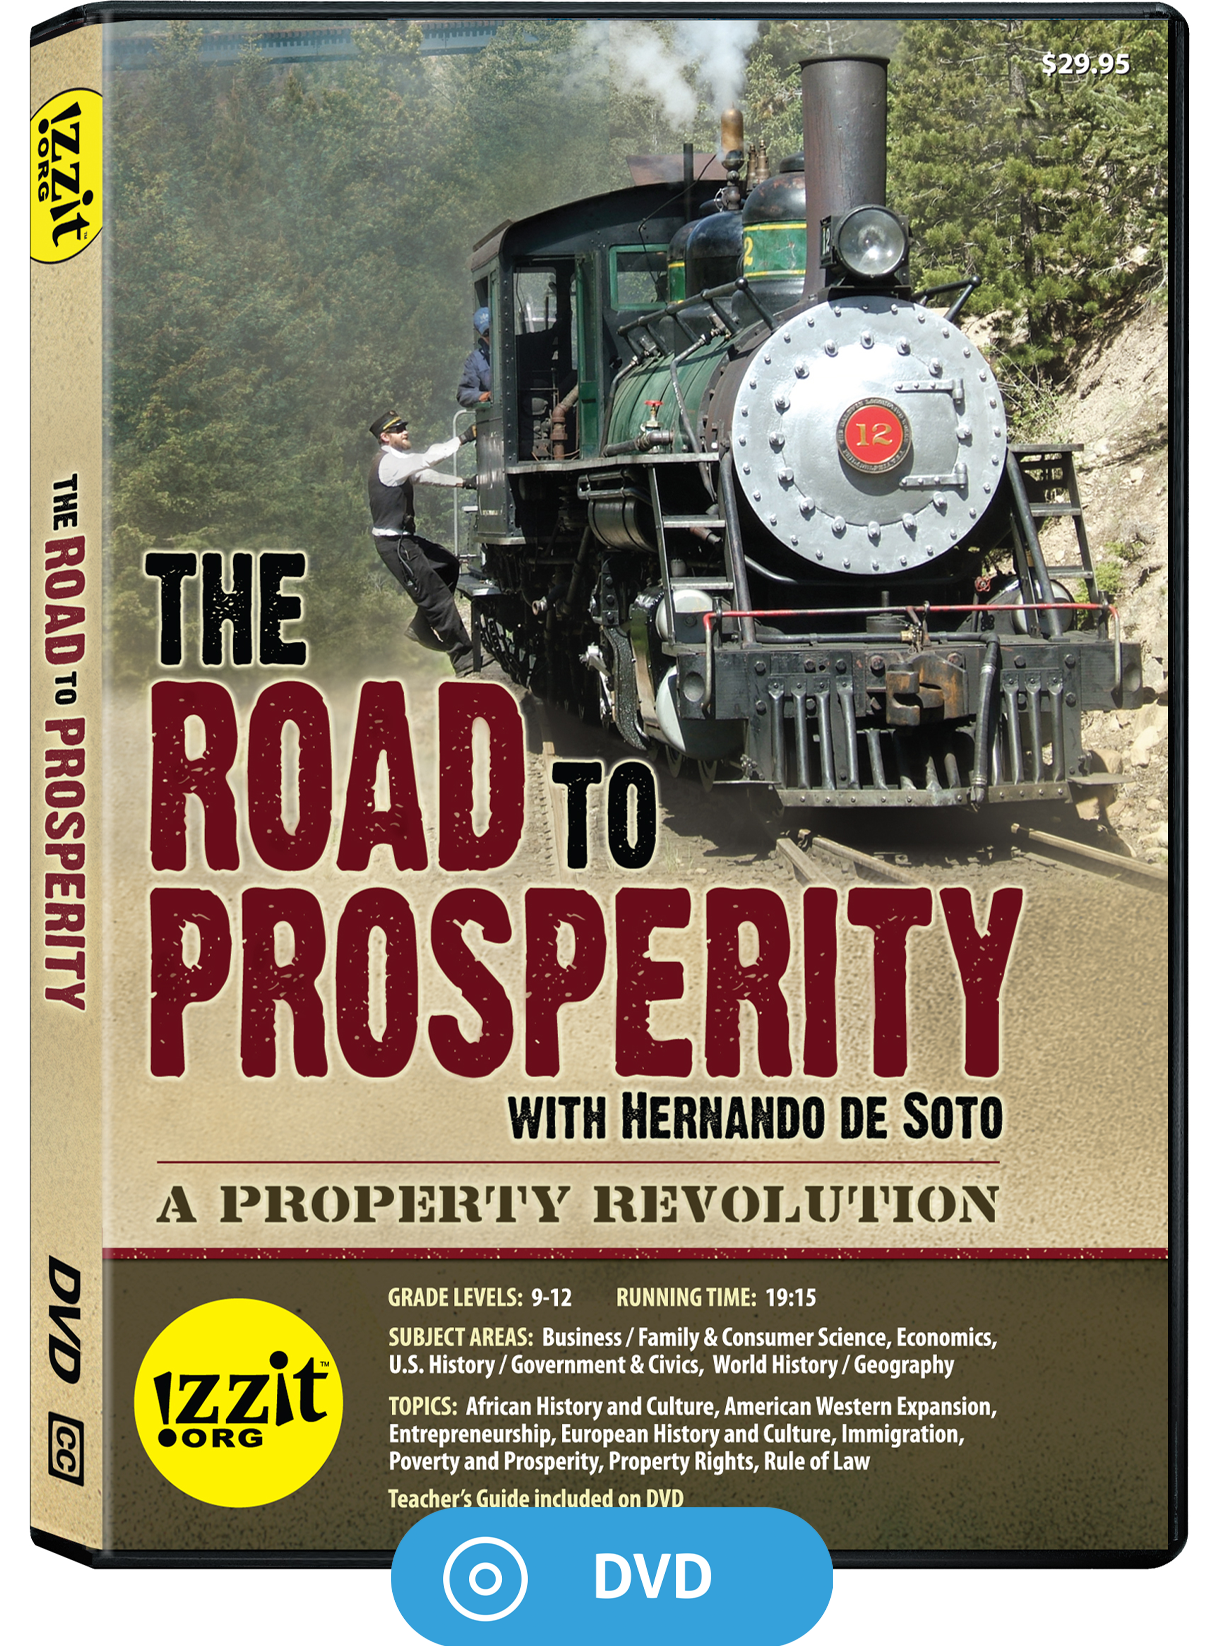 The Road to Prosperity DVD